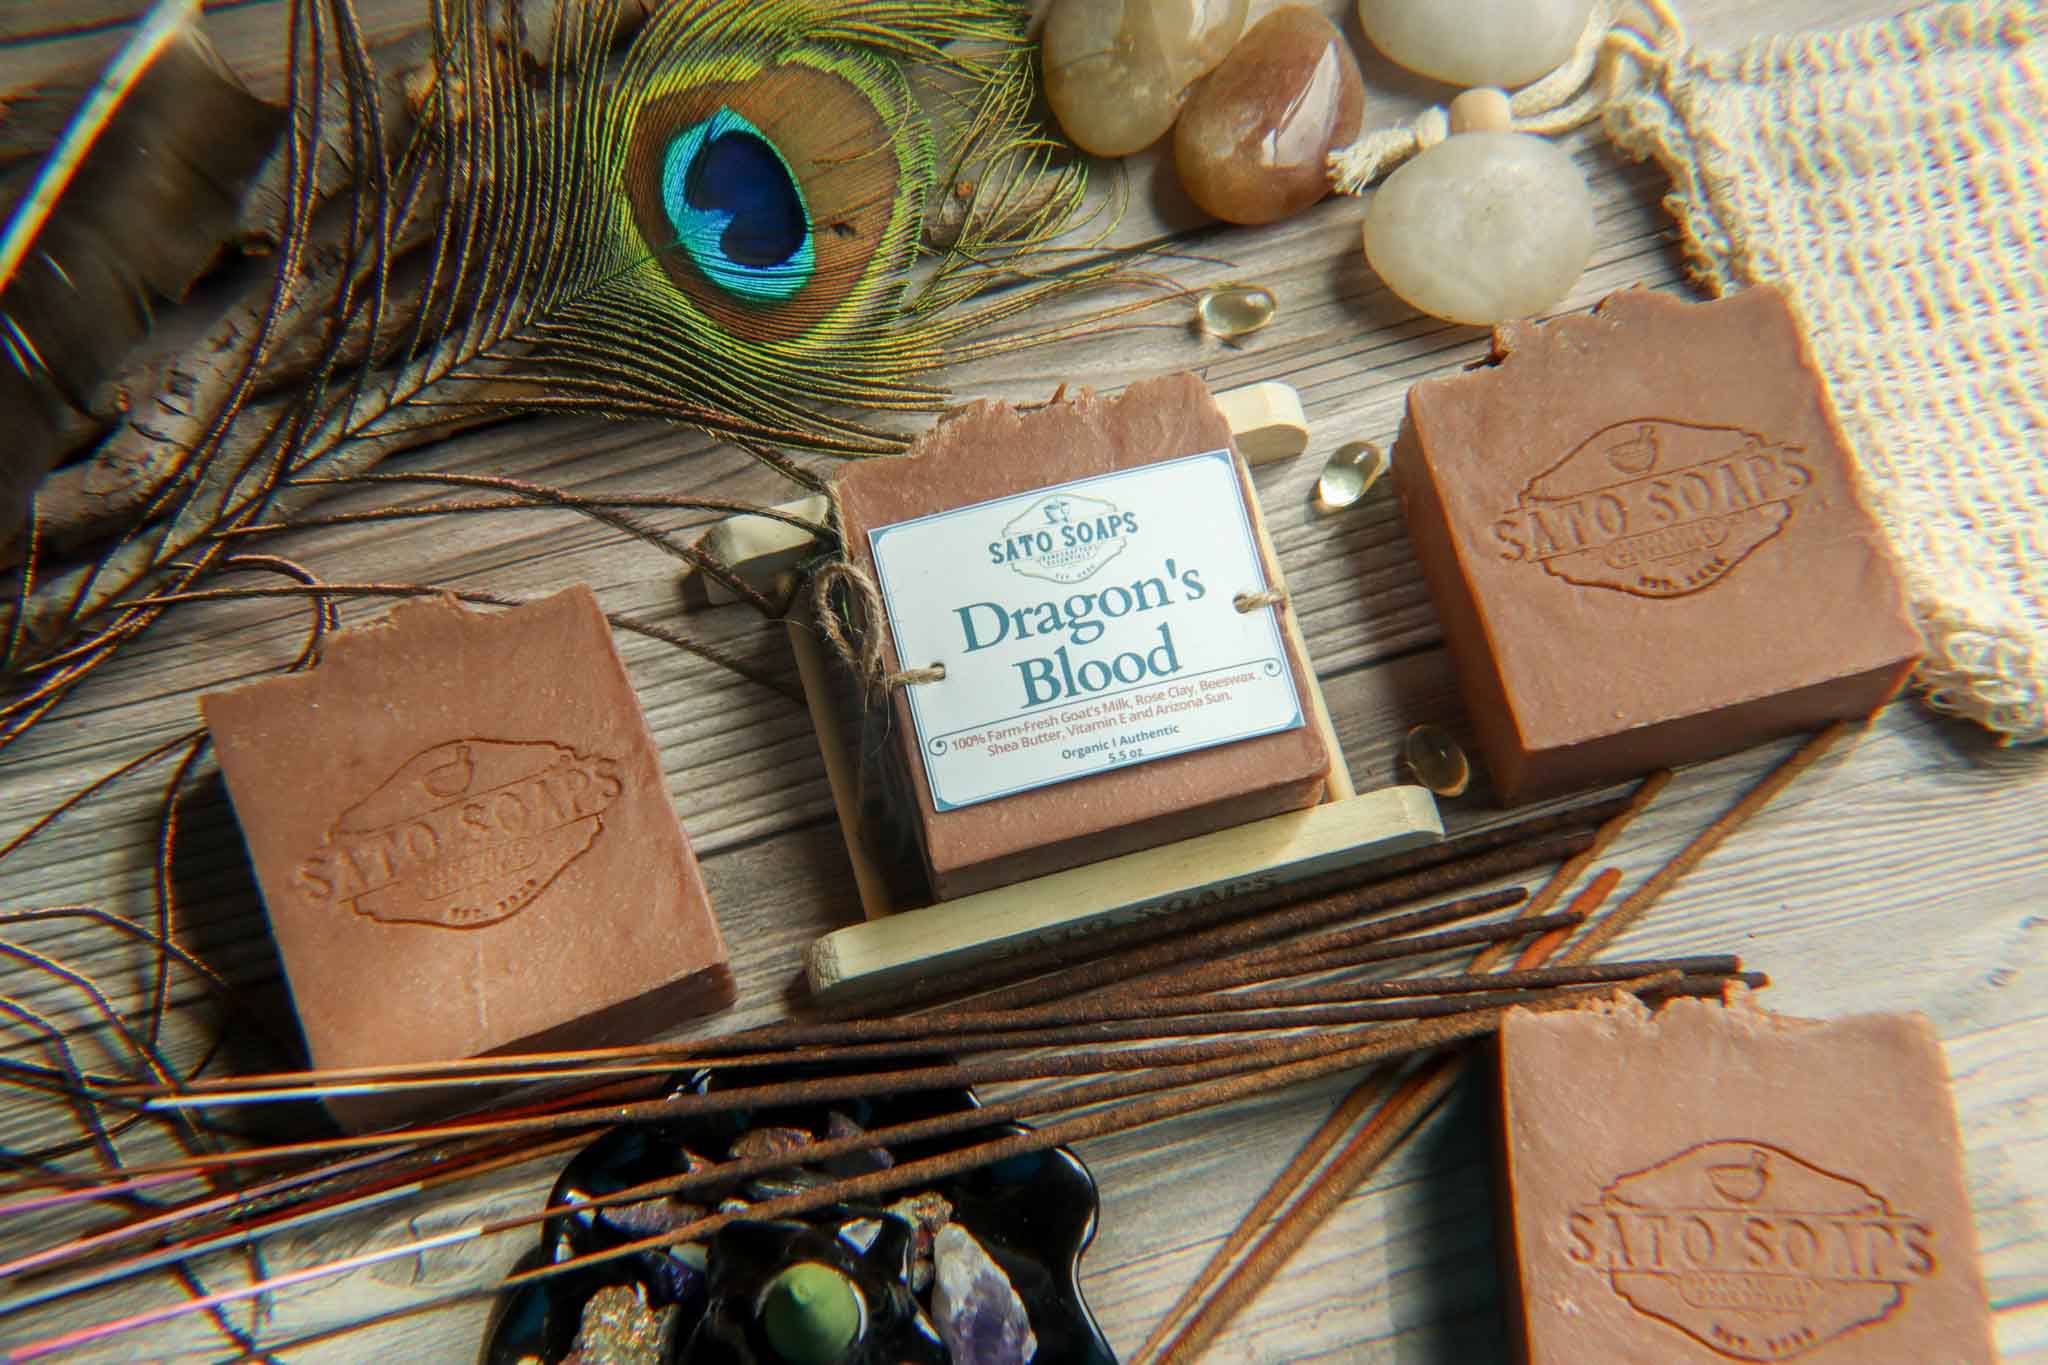 Dragon's Blood Luxurious Goatmilk with Shea Butter and Rose Clay Body Soap Bar